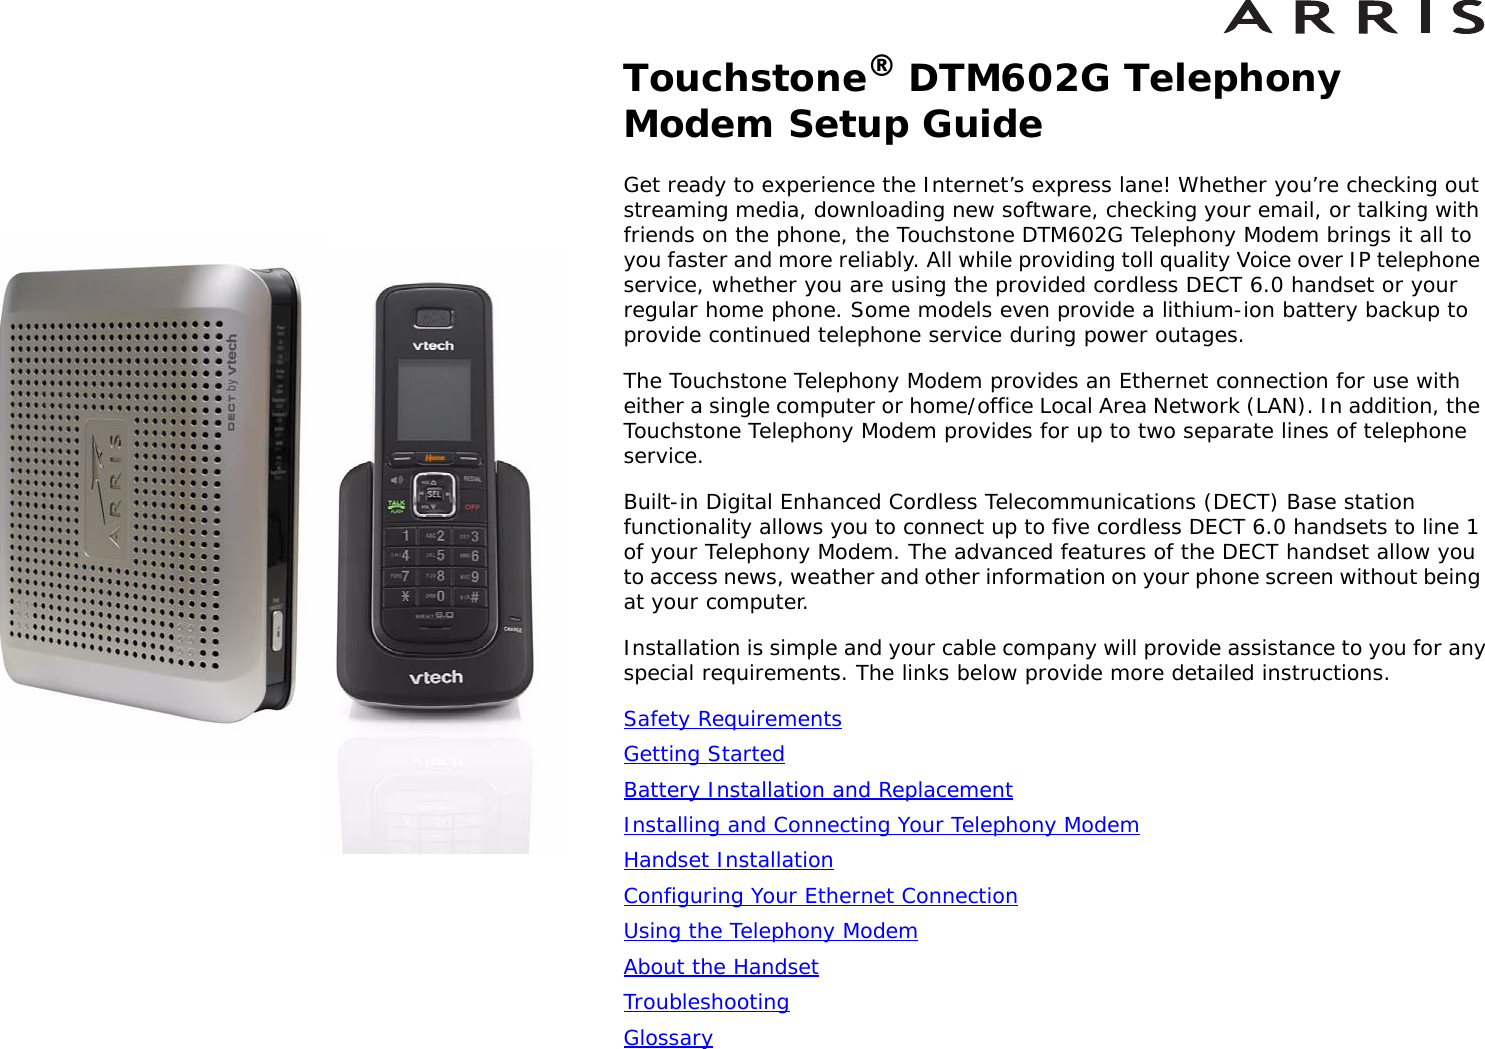 Touchstone® DTM602G Telephony Modem Setup GuideGet ready to experience the Internet’s express lane! Whether you’re checking out streaming media, downloading new software, checking your email, or talking with friends on the phone, the Touchstone DTM602G Telephony Modem brings it all to you faster and more reliably. All while providing toll quality Voice over IP telephone service, whether you are using the provided cordless DECT 6.0 handset or your regular home phone. Some models even provide a lithium-ion battery backup to provide continued telephone service during power outages.The Touchstone Telephony Modem provides an Ethernet connection for use with either a single computer or home/office Local Area Network (LAN). In addition, the Touchstone Telephony Modem provides for up to two separate lines of telephone service.Built-in Digital Enhanced Cordless Telecommunications (DECT) Base station functionality allows you to connect up to five cordless DECT 6.0 handsets to line 1 of your Telephony Modem. The advanced features of the DECT handset allow you to access news, weather and other information on your phone screen without being at your computer.Installation is simple and your cable company will provide assistance to you for any special requirements. The links below provide more detailed instructions.Safety RequirementsGetting StartedBattery Installation and ReplacementInstalling and Connecting Your Telephony ModemHandset InstallationConfiguring Your Ethernet ConnectionUsing the Telephony ModemAbout the HandsetTroubleshootingGlossary